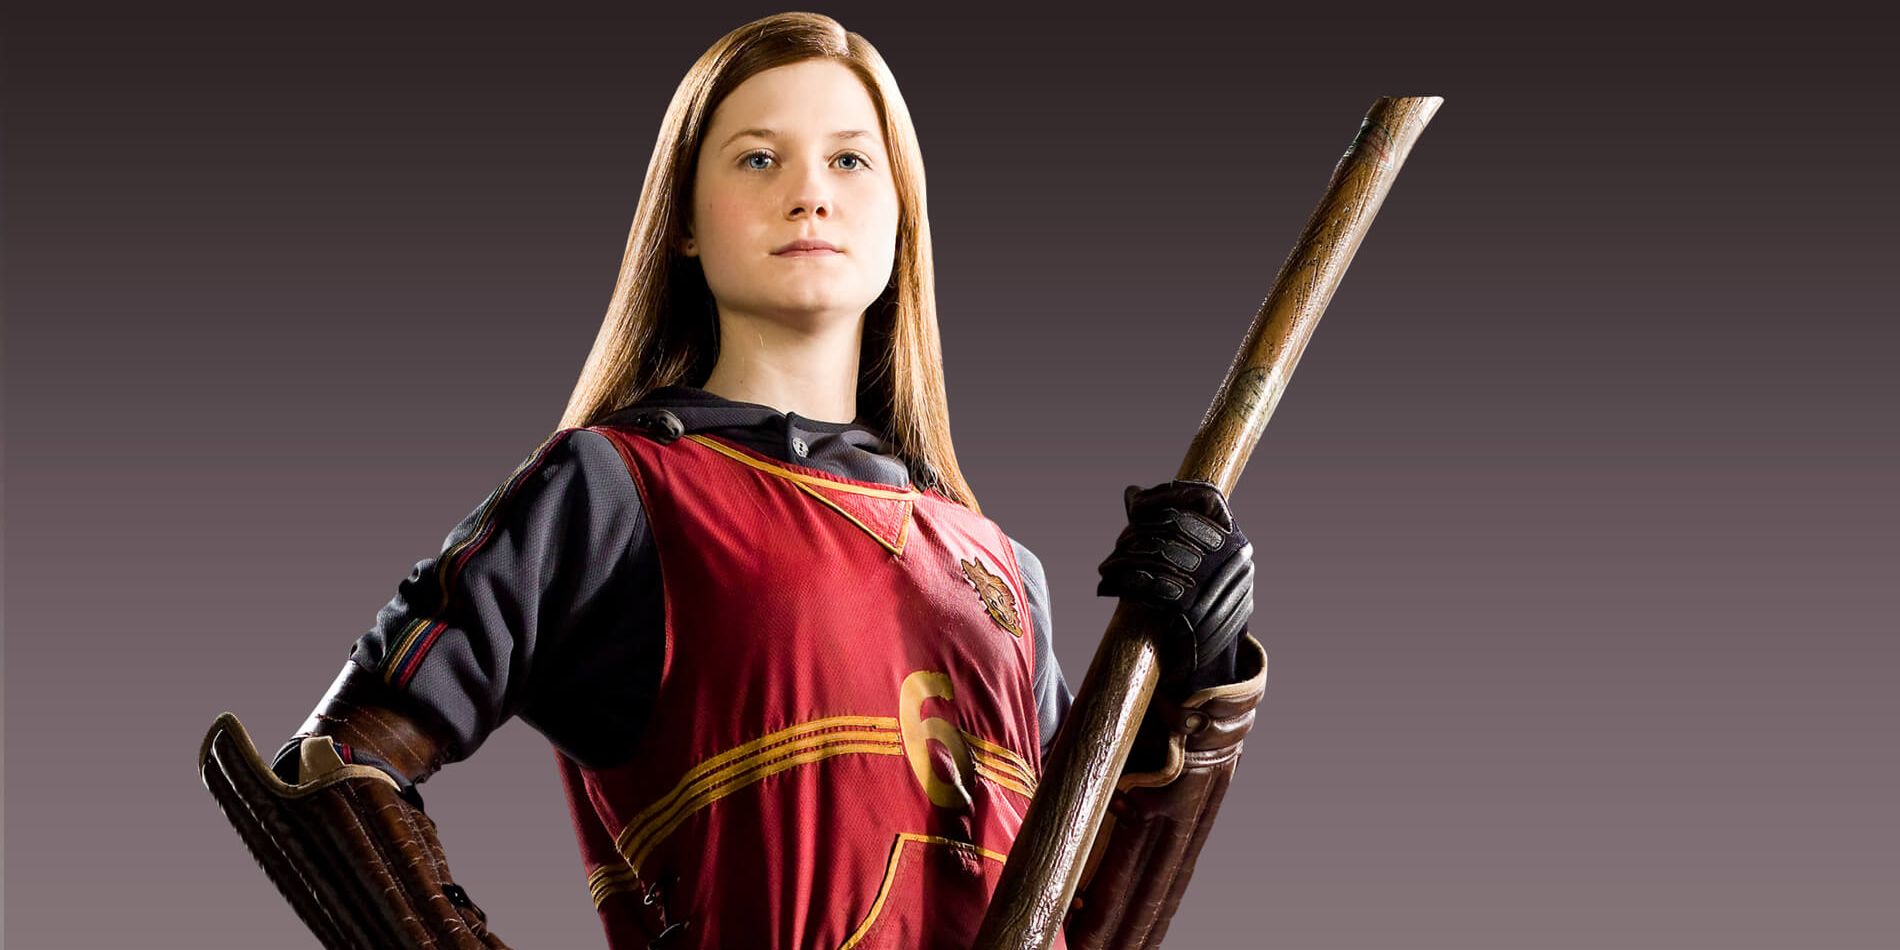 Ginny Weasley wearing a Quidditch uniform and holding her broomstick